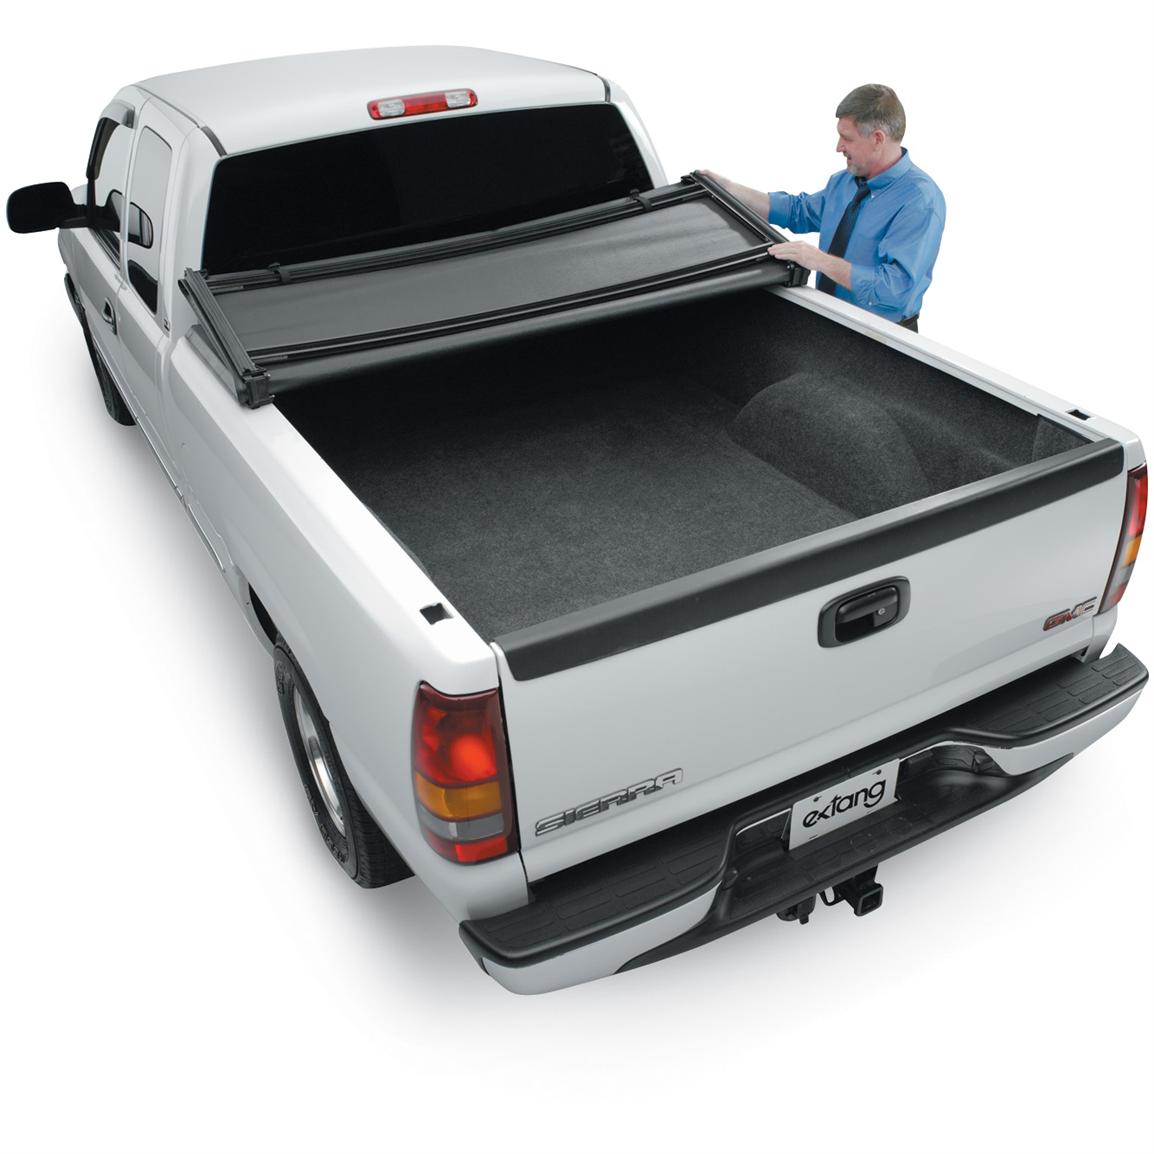 Extang Trifecta Tonneau Cover 167009 Truck Accessories At Sportsman39s Guide